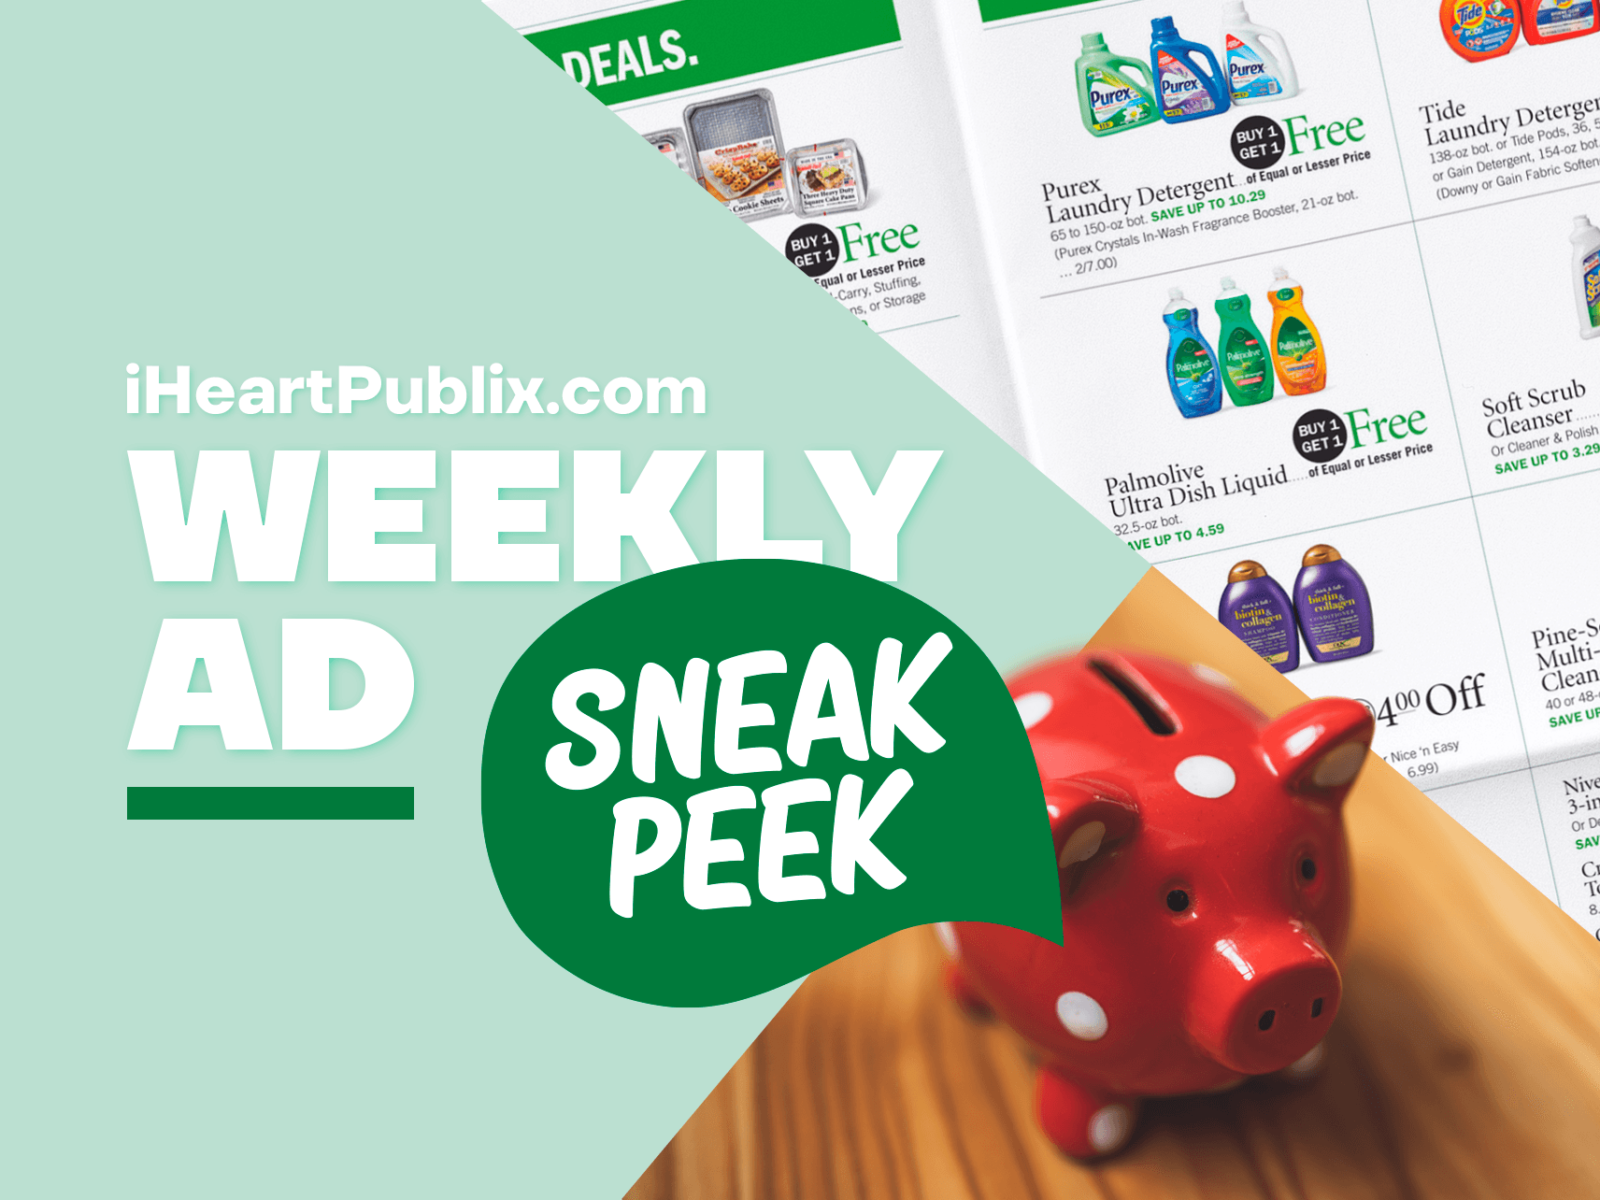 Publix Ad & Coupons Week Of 12/7 To 12/13 (12/6 To 12/12 For Some)